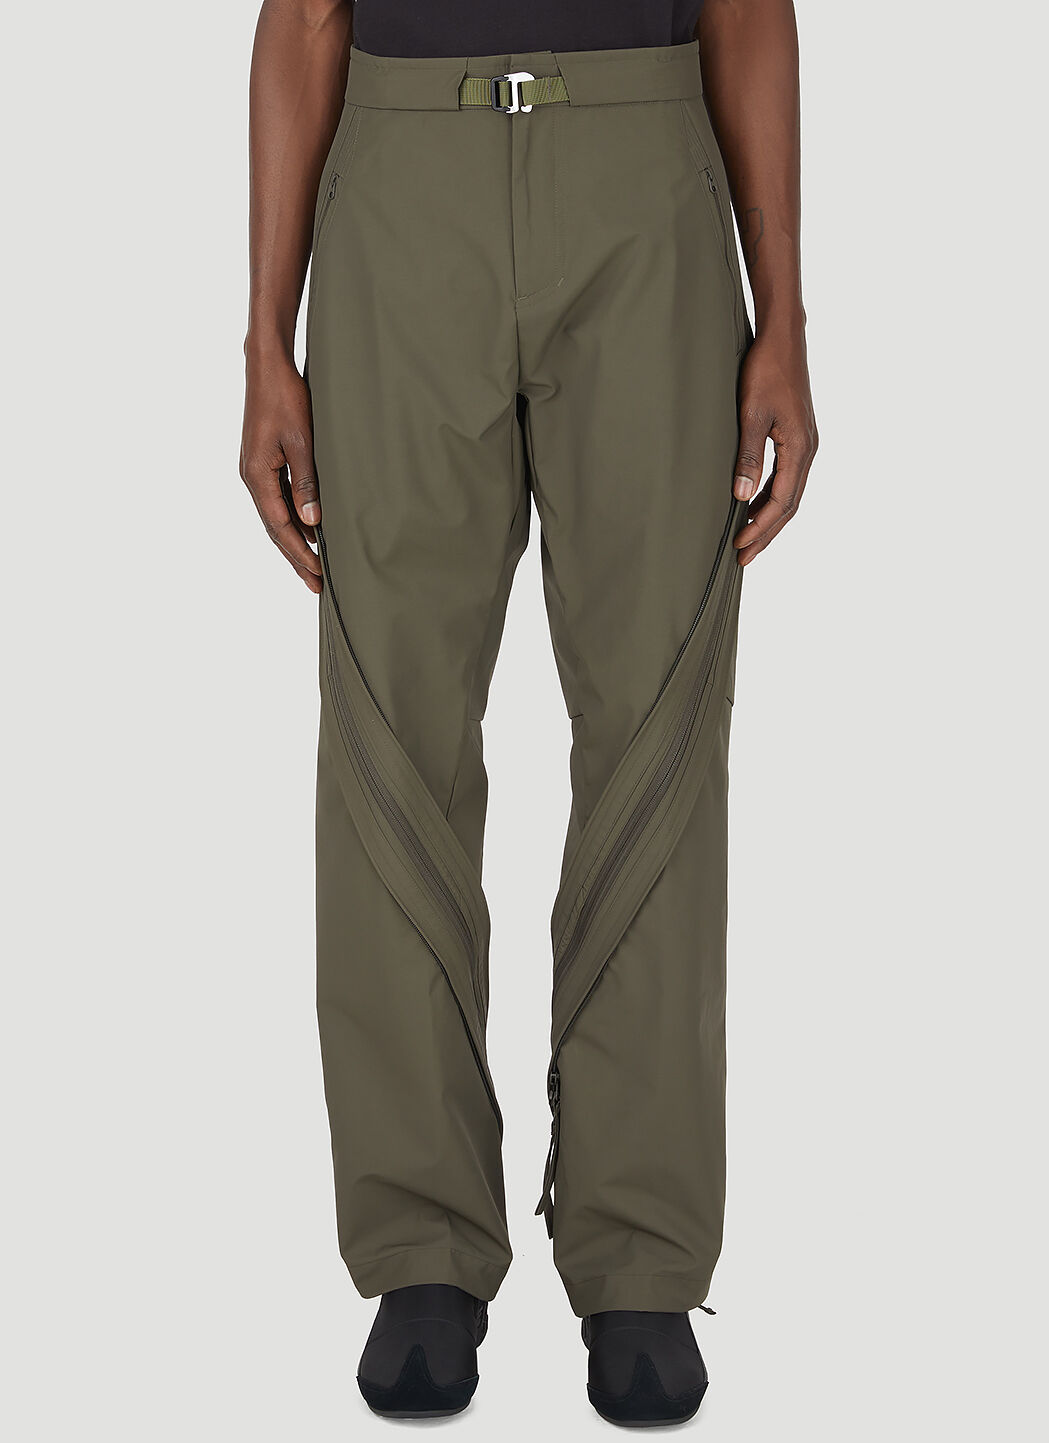 POST ARCHIVE FACTION (PAF) 4.0+ Technical Right Pants in Green